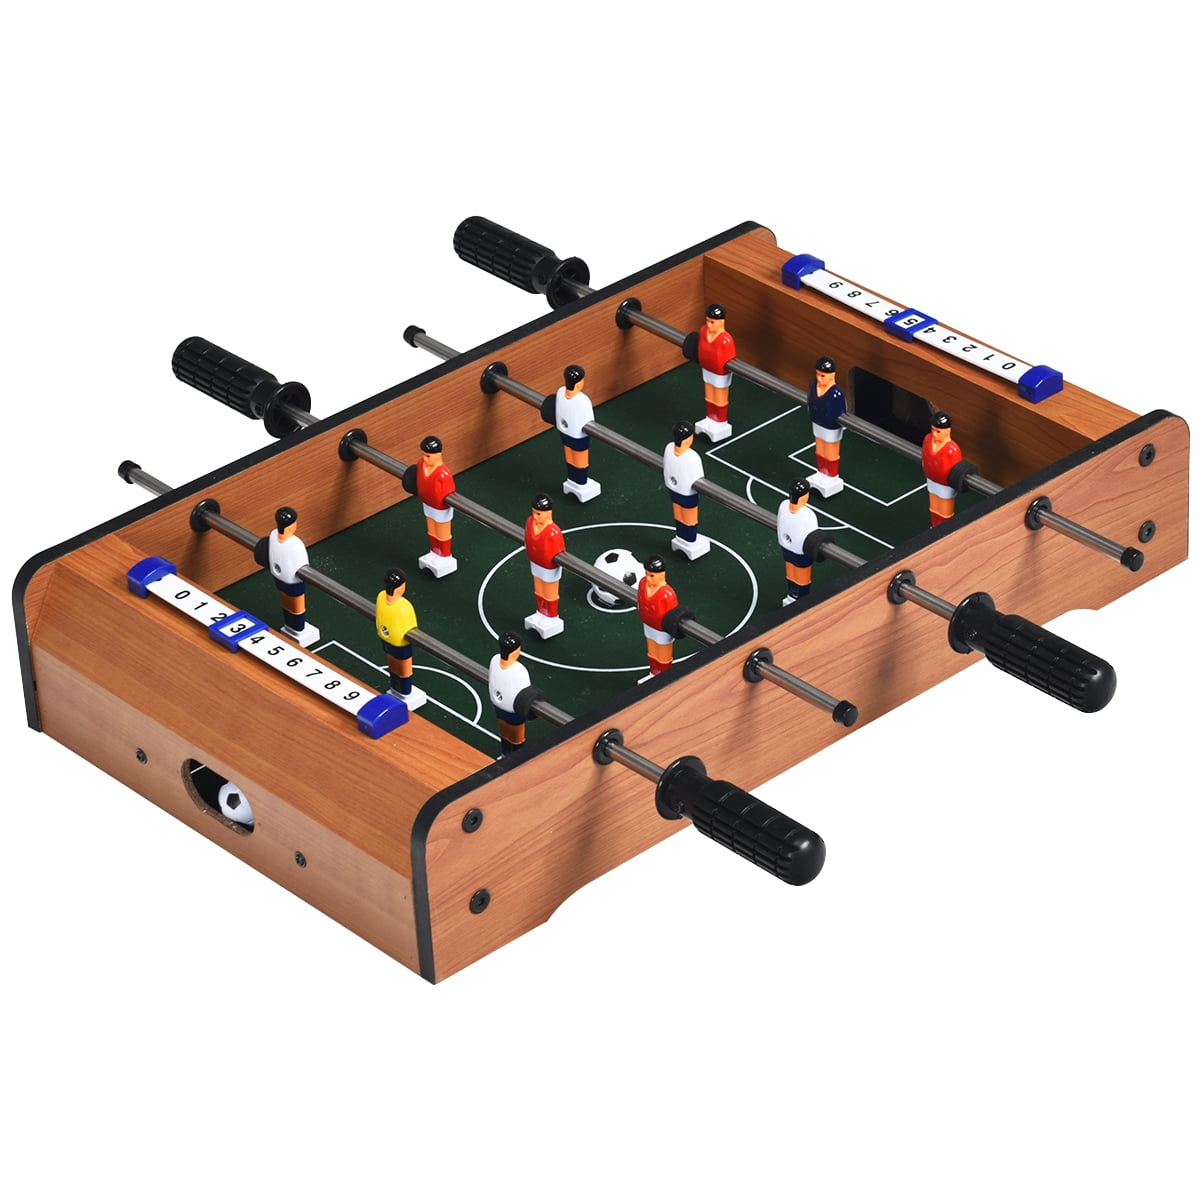 20" Foosball Table Christmas Gift Game Soccer Arcade Size Football Sports Indoor 